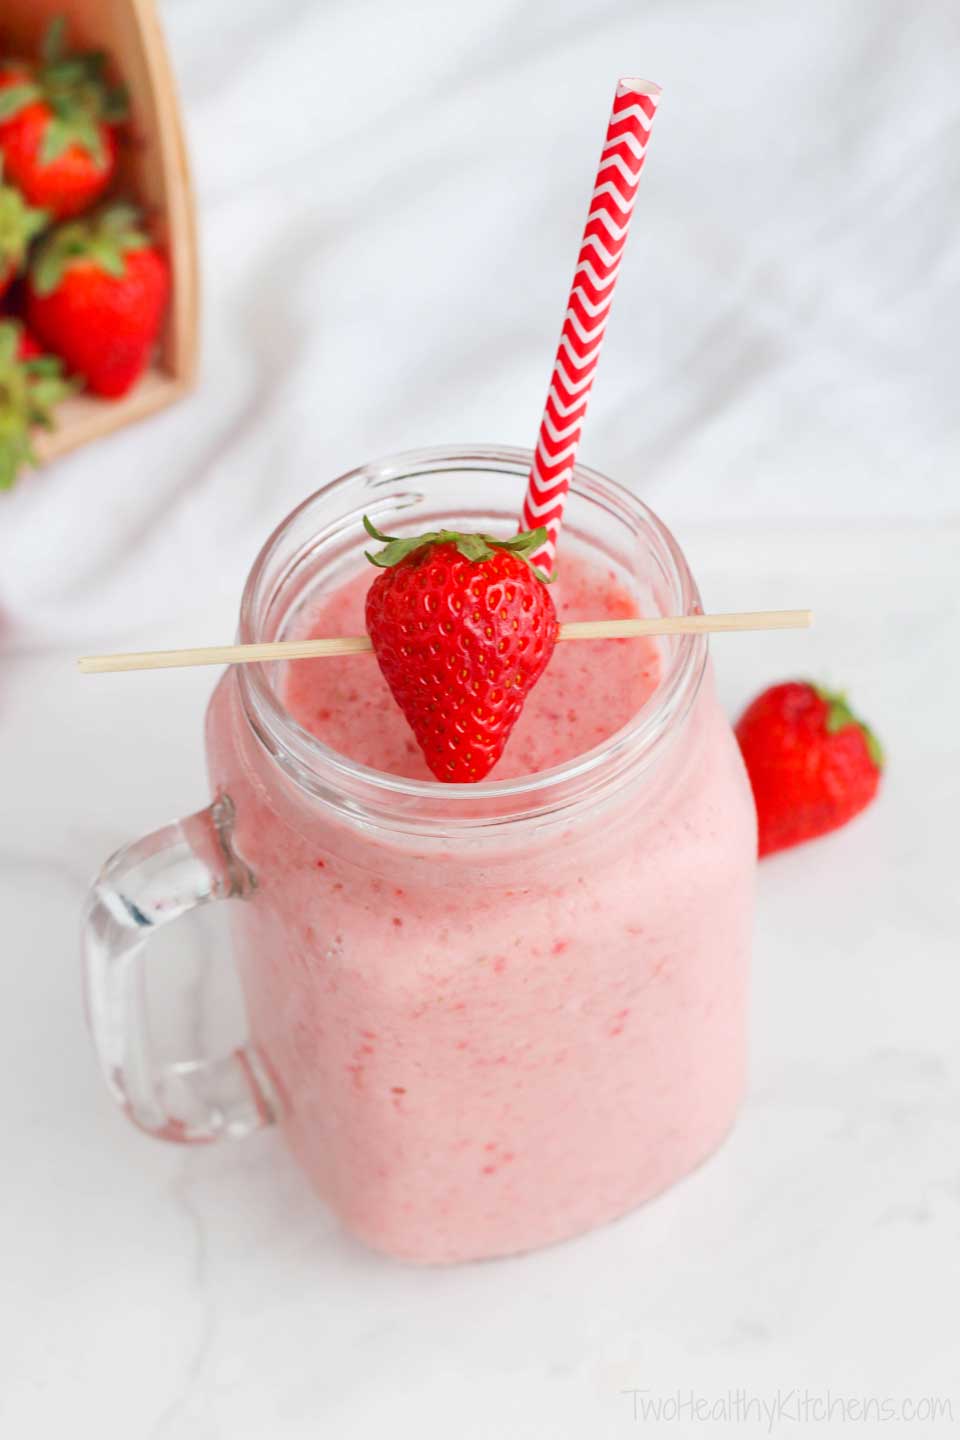 Strawberry-Banana Smoothie in a glass mug, decorated with a striped straw and a skewered strawberry